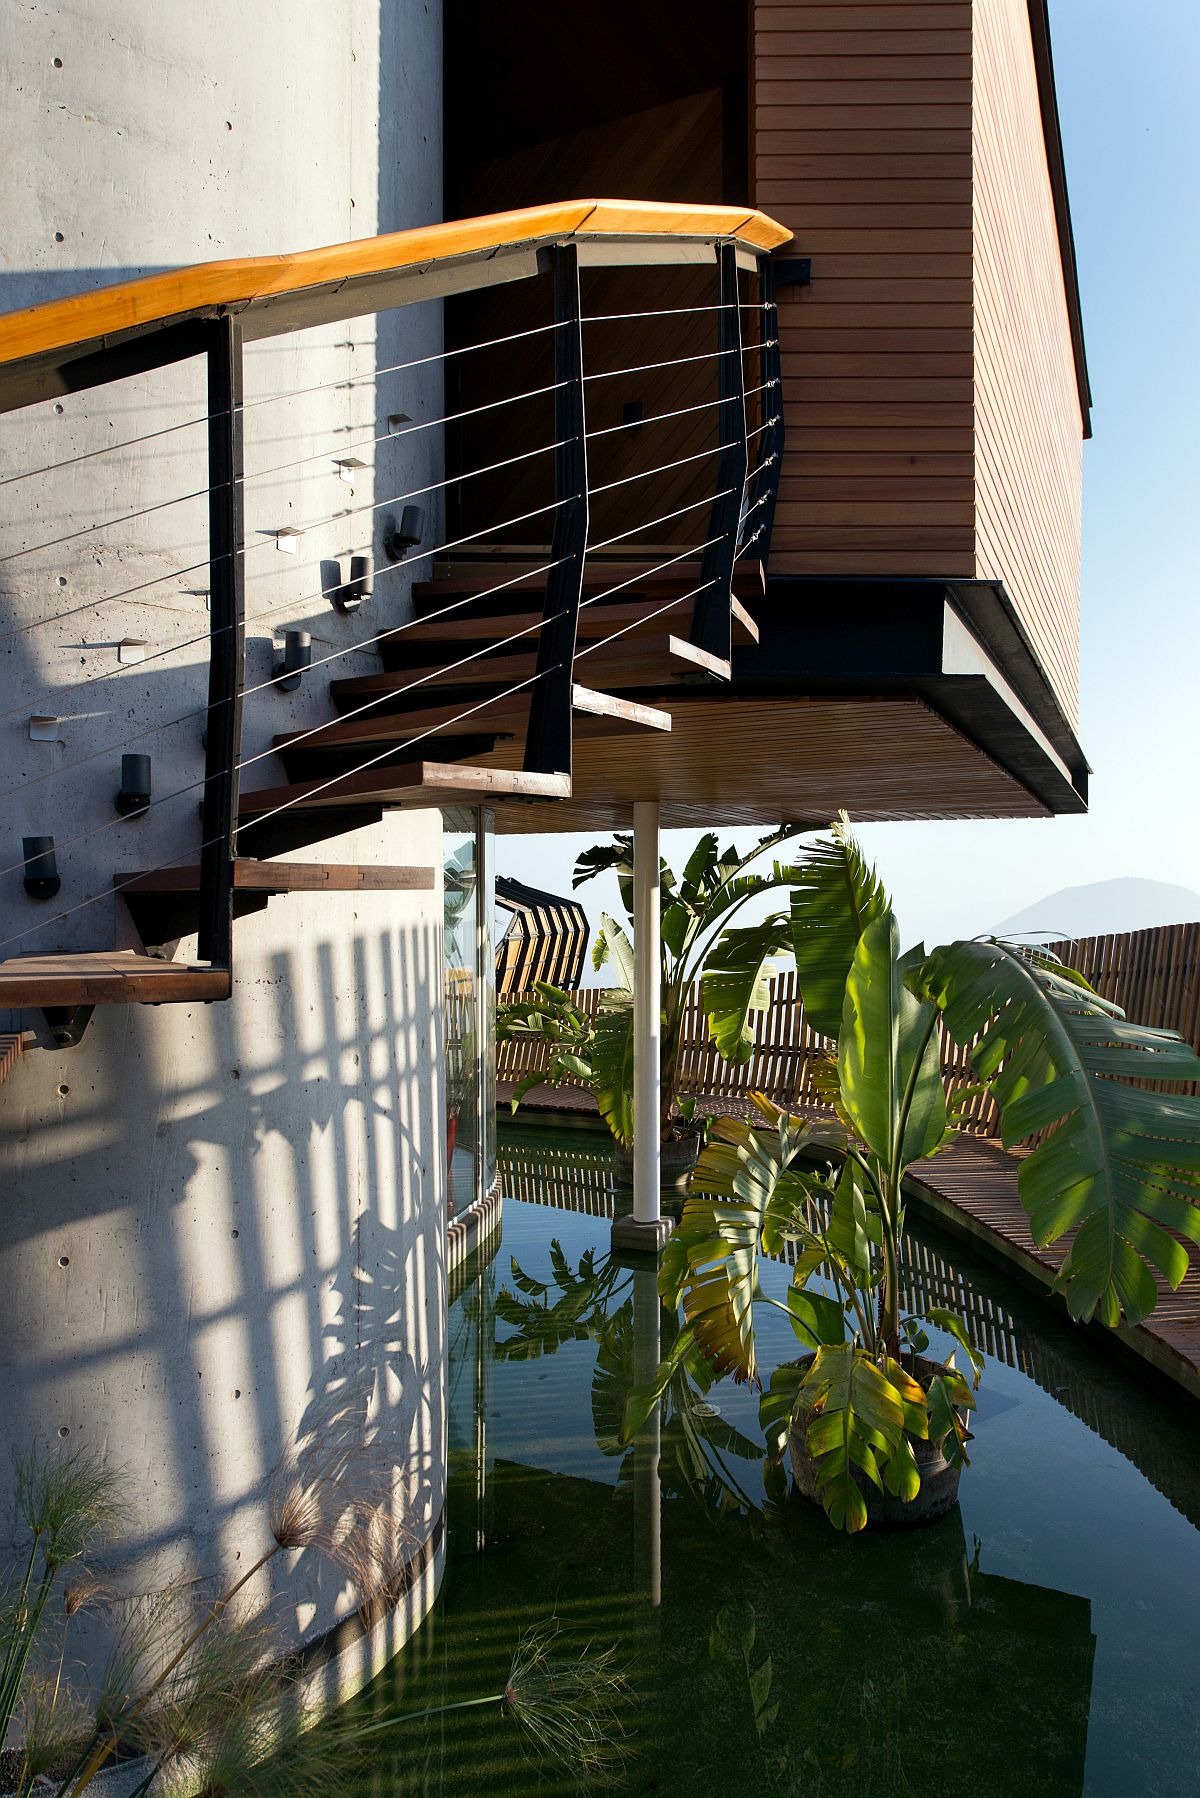 Stairwell-with-spiral-staircase-on-the-outside-and-a-reflecting-pond-next-to-it